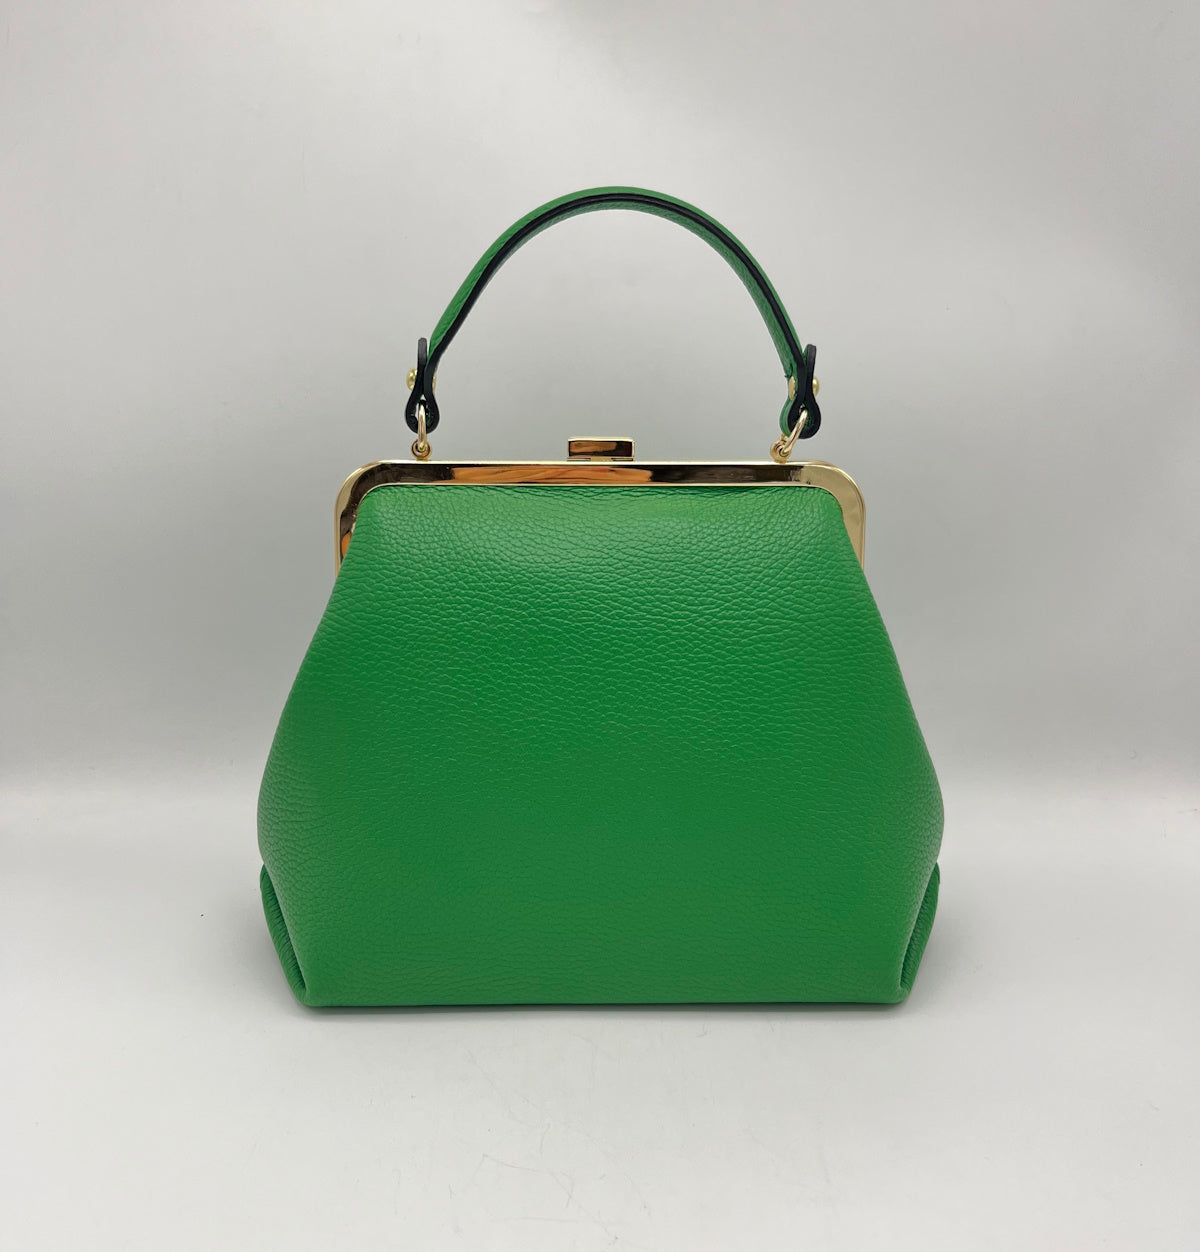 Genuine leather top handle bag, Made in Italy, art. 112463